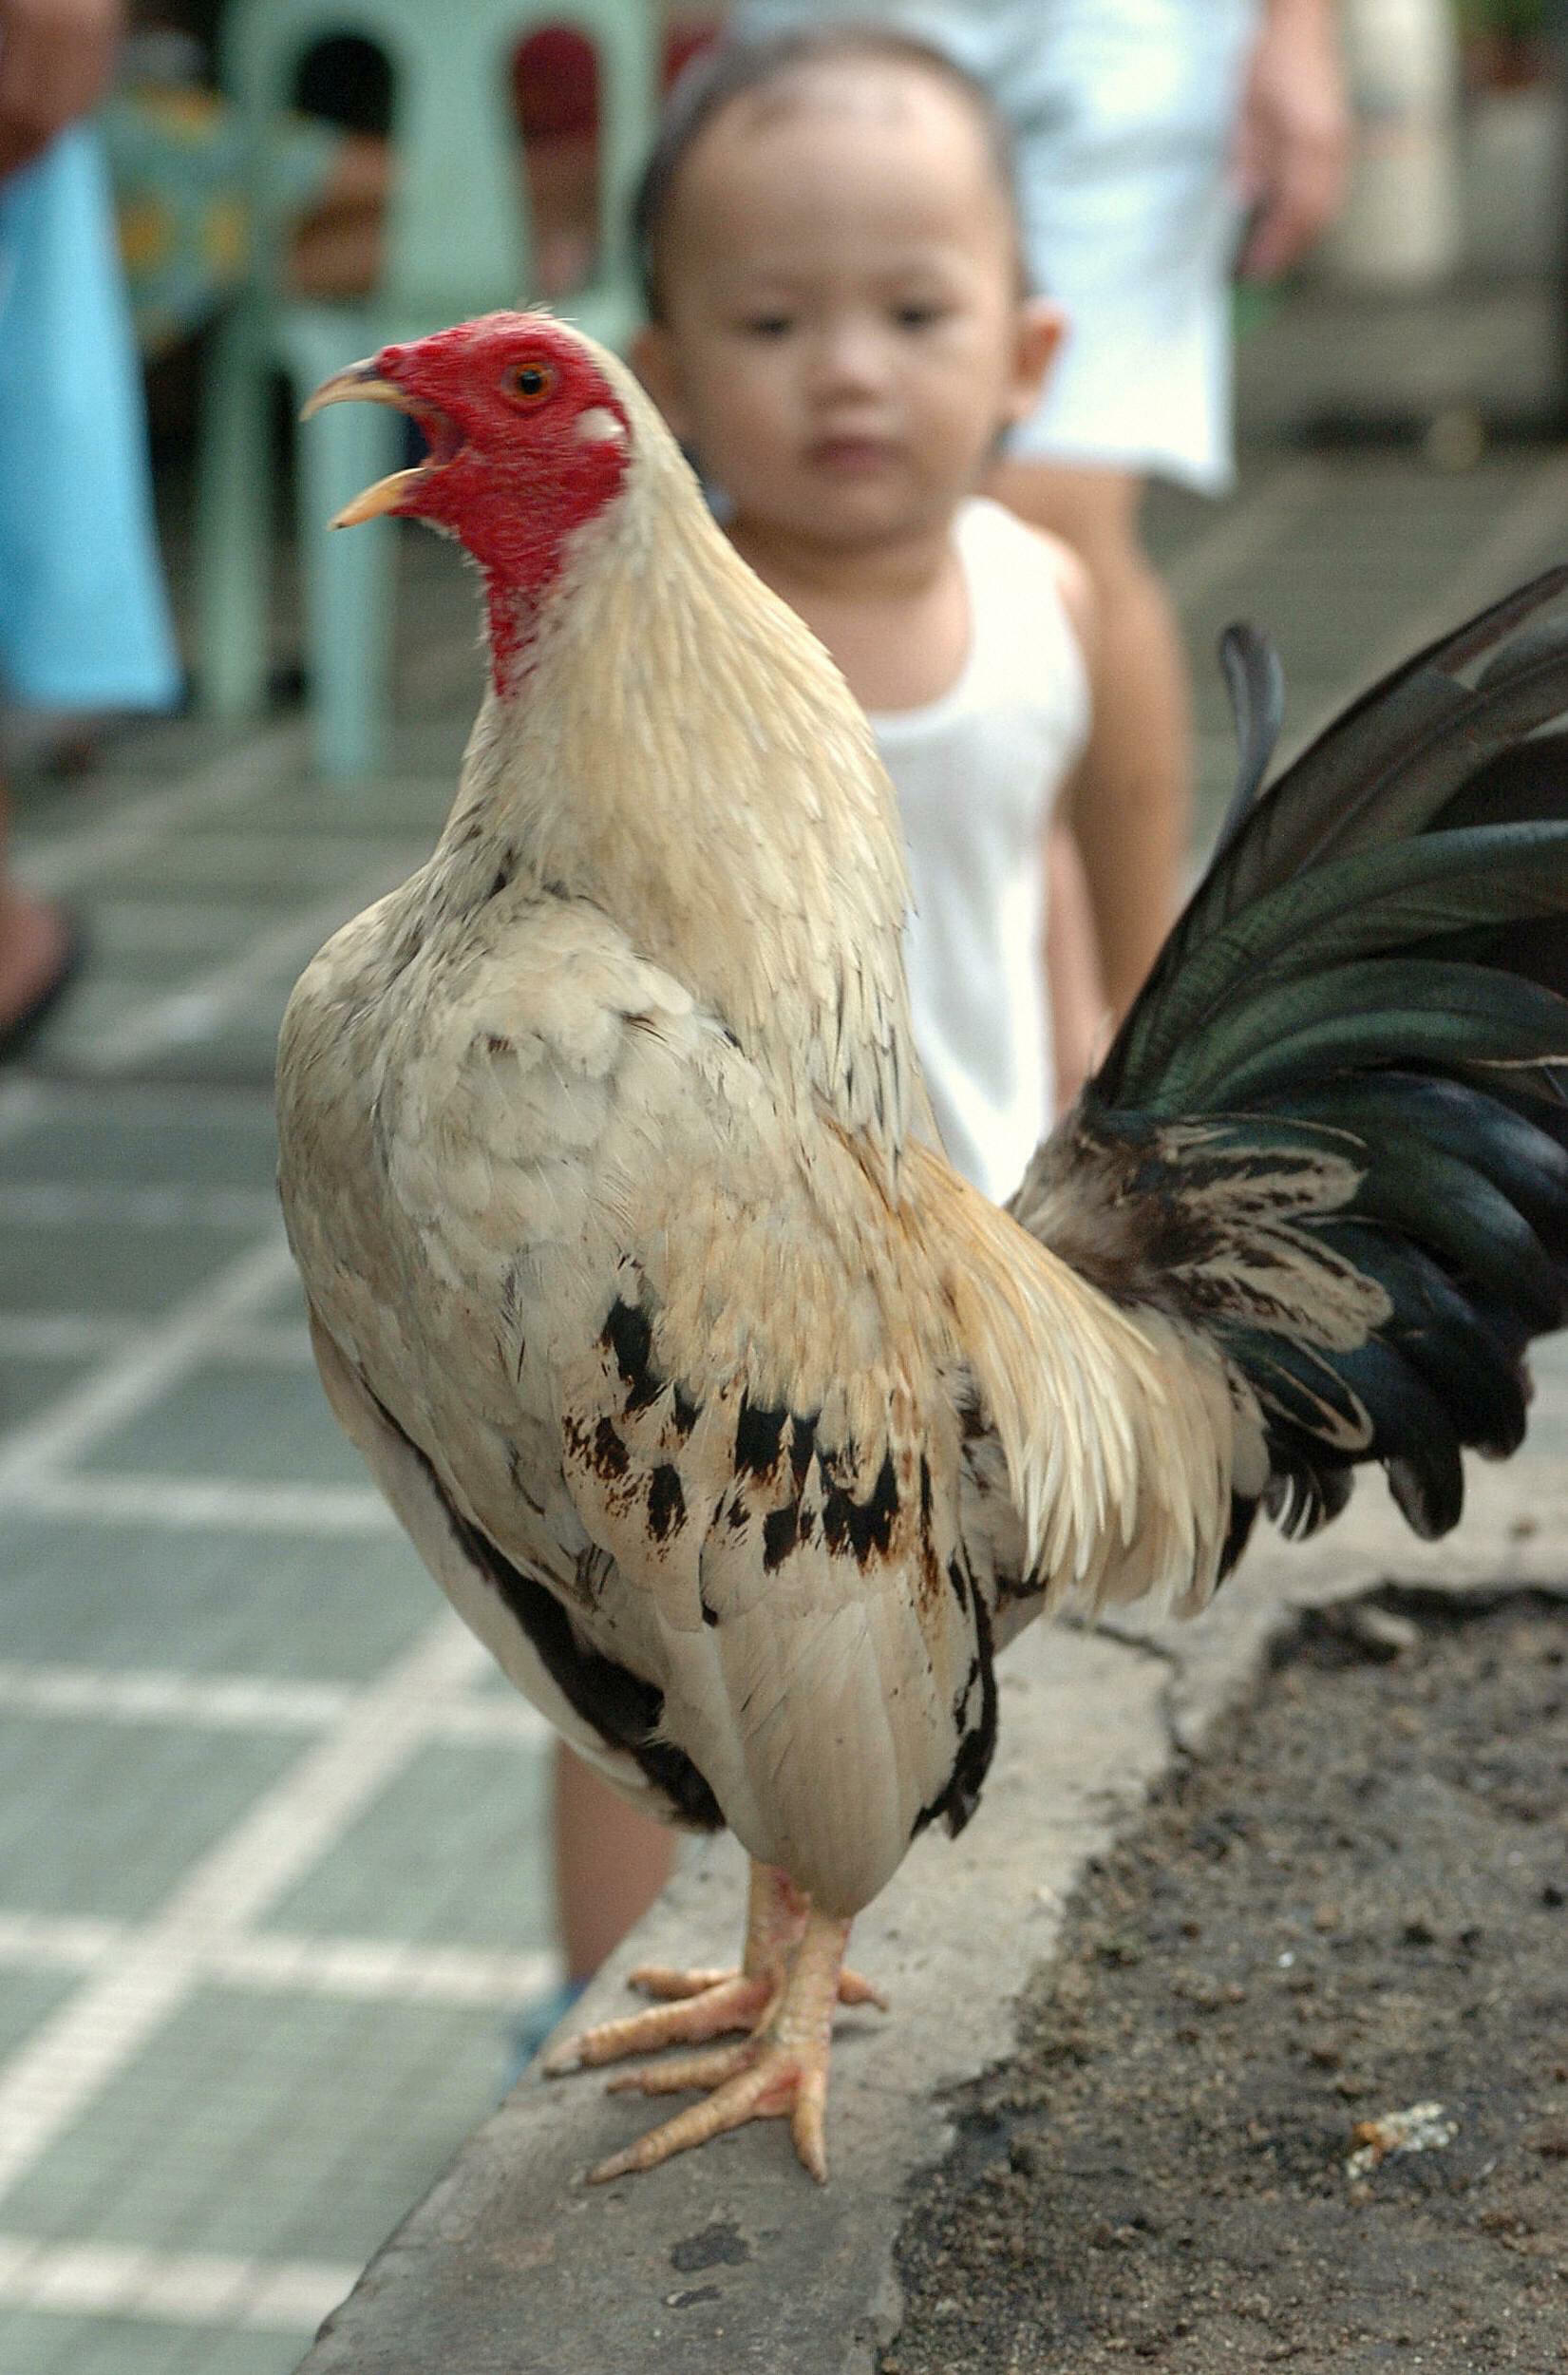 MANILA, PHILIPPINES:  A Filipino child looks at a crowing rooster in Manila, 29 September 2005.  The Philippine government has put in place measures to prevent bird flu, including a ban on ownership of excotive birds.   AFP PHOTO/Jay DIRECTO  (Photo credi